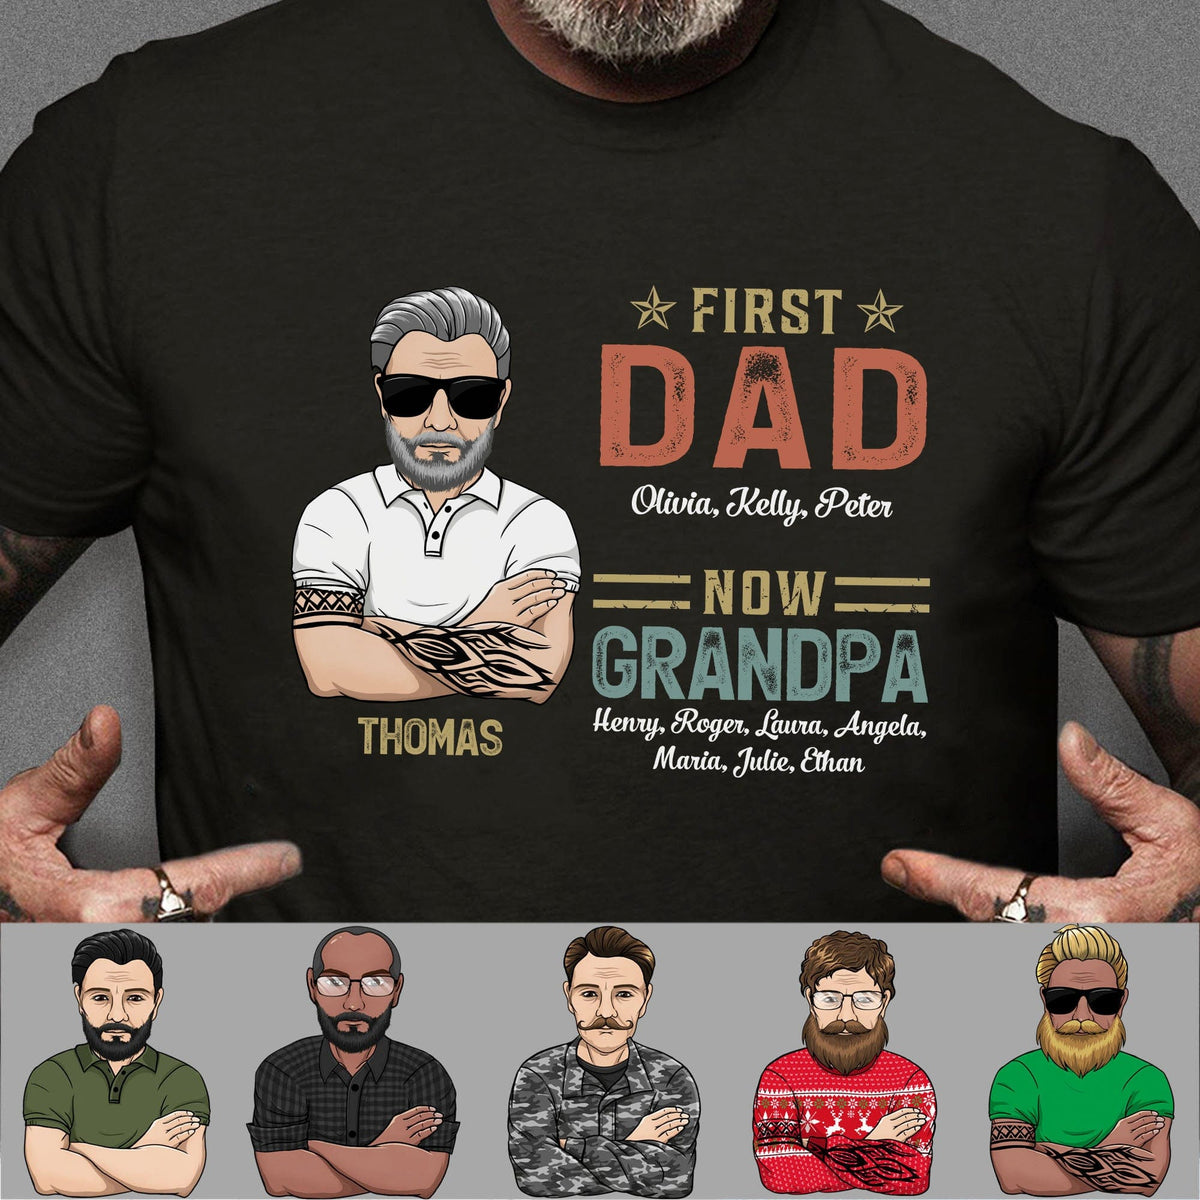 Personalized Father Day Gift Ideas, First Dad Now Grandpa Personalized Custom Father's Day Birthday Dark Shirt C337, Long Sleeve / Colour Dark Heather